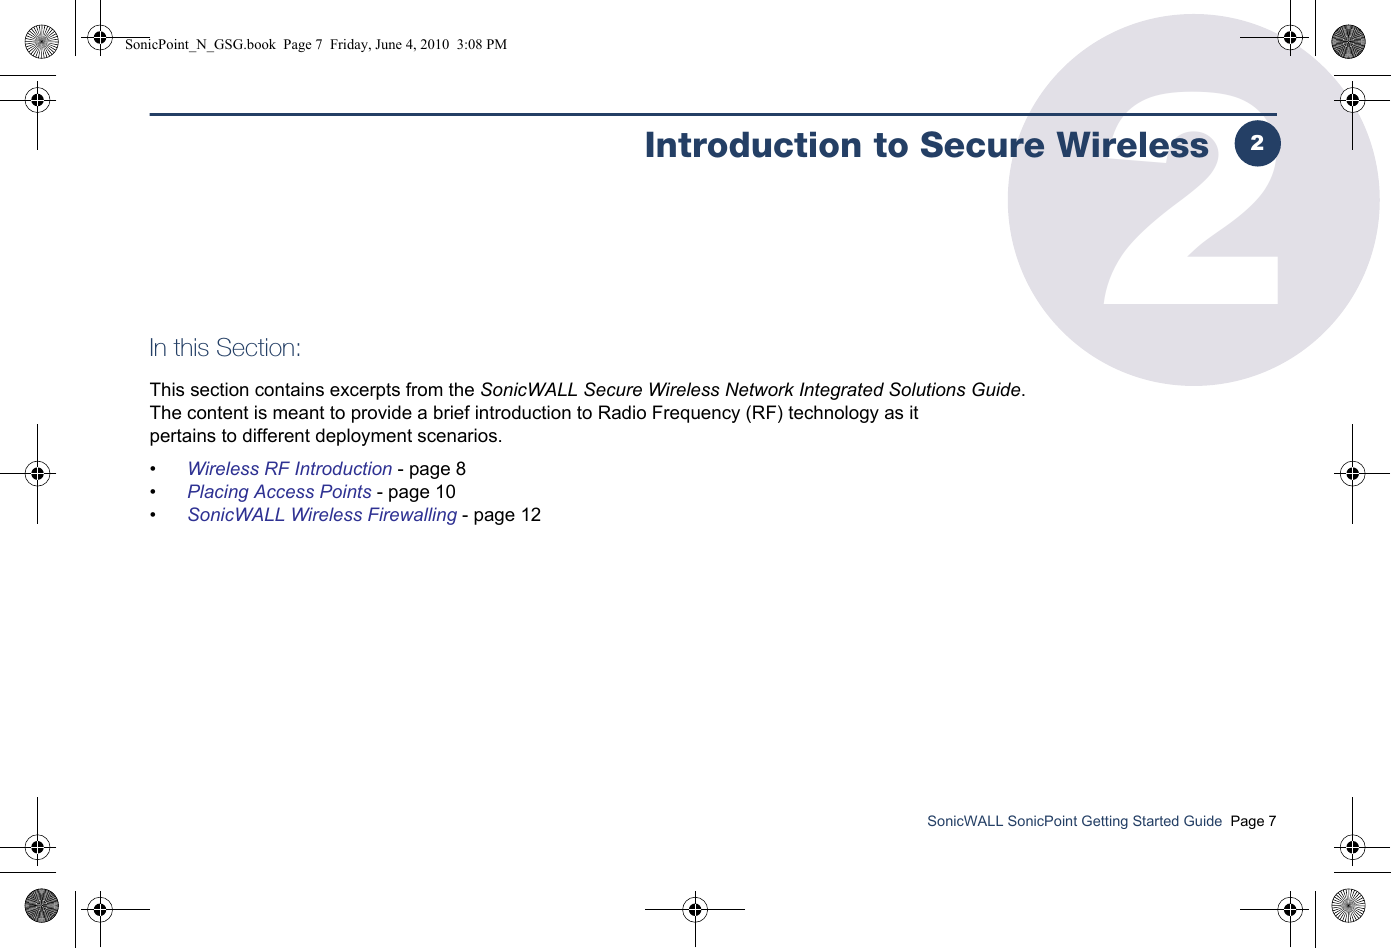 SonicWALL SonicPoint Getting Started Guide  Page 72Introduction to Secure WirelessIn this Section:This section contains excerpts from the SonicWALL Secure Wireless Network Integrated Solutions Guide. The content is meant to provide a brief introduction to Radio Frequency (RF) technology as it pertains to different deployment scenarios.•Wireless RF Introduction - page 8•Placing Access Points - page 10•SonicWALL Wireless Firewalling - page 122SonicPoint_N_GSG.book  Page 7  Friday, June 4, 2010  3:08 PM